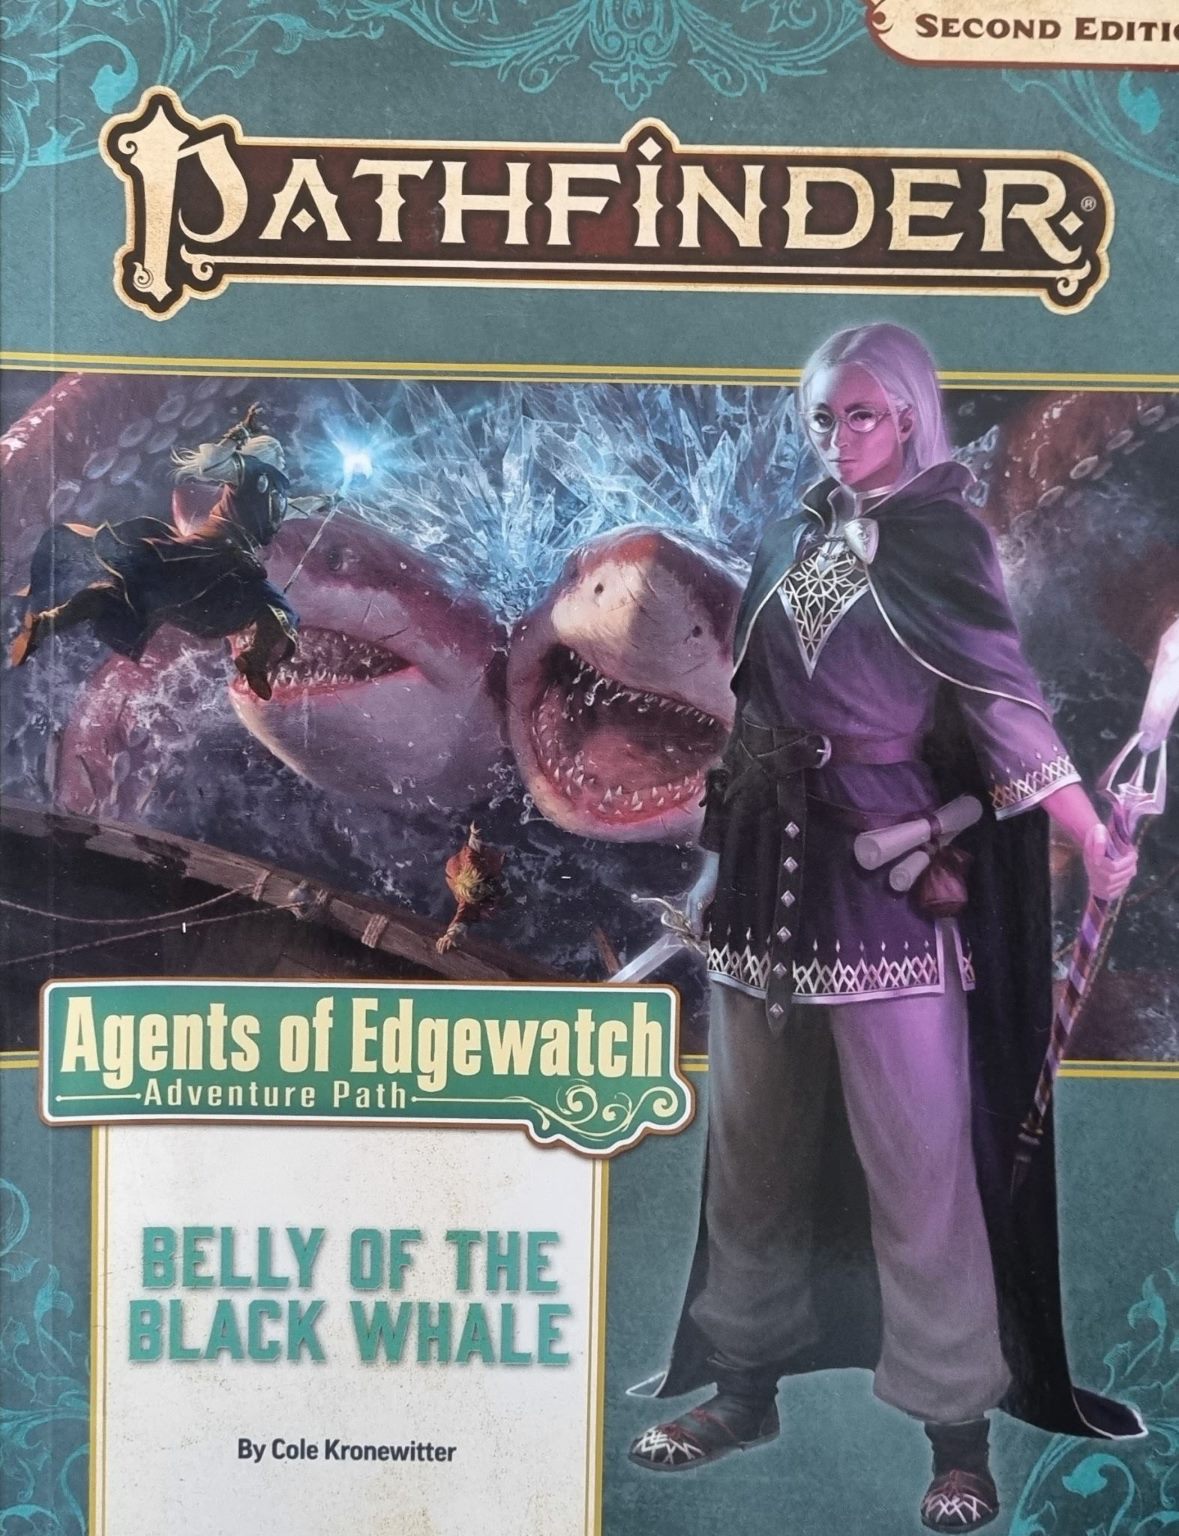 Pathfinder: Agents of Edgewatch - Belly of the Black Whale - 2nd Edition (2e)